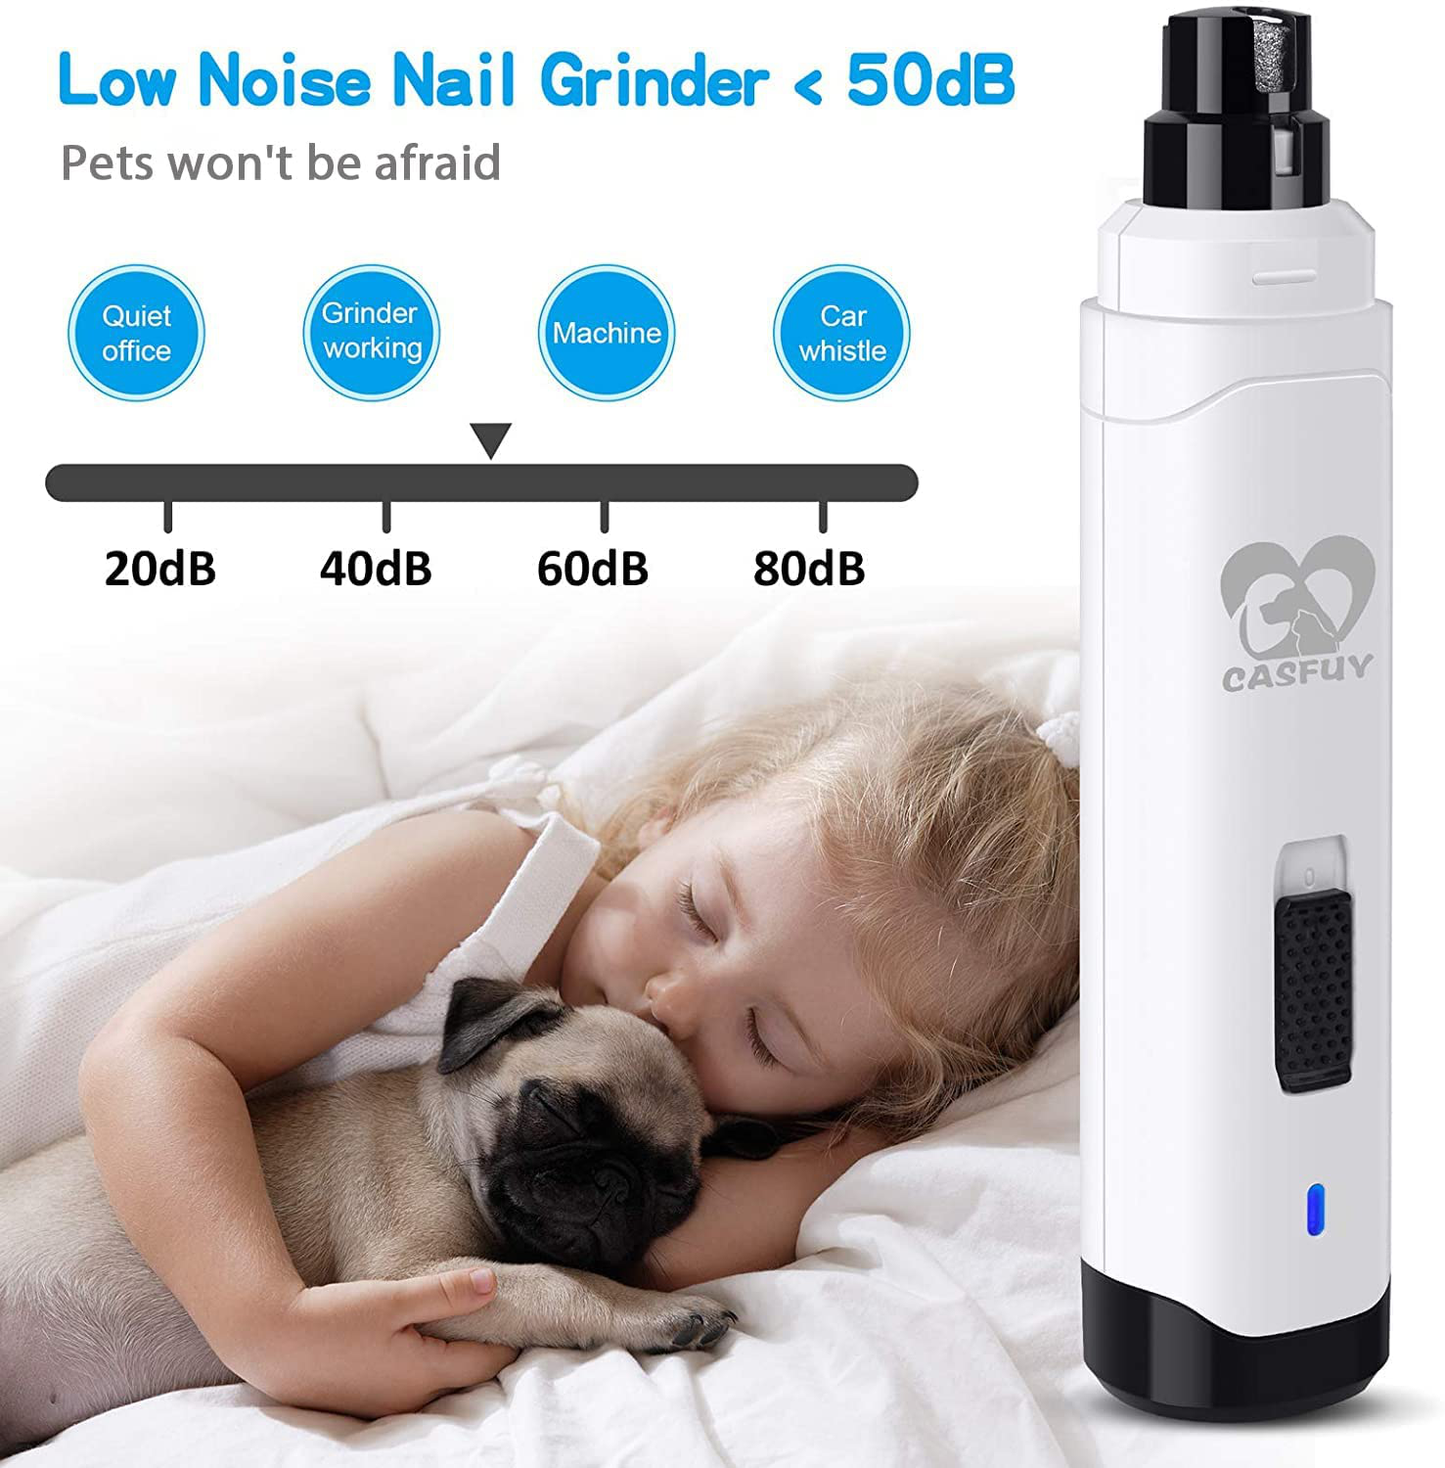 Casfuy Dog Nail Grinder Upgraded - Professional 2-Speed Electric Rechargeable Pet Nail Trimmer Painless Paws Grooming & Smoothing for Small Medium Large Dogs & Cats